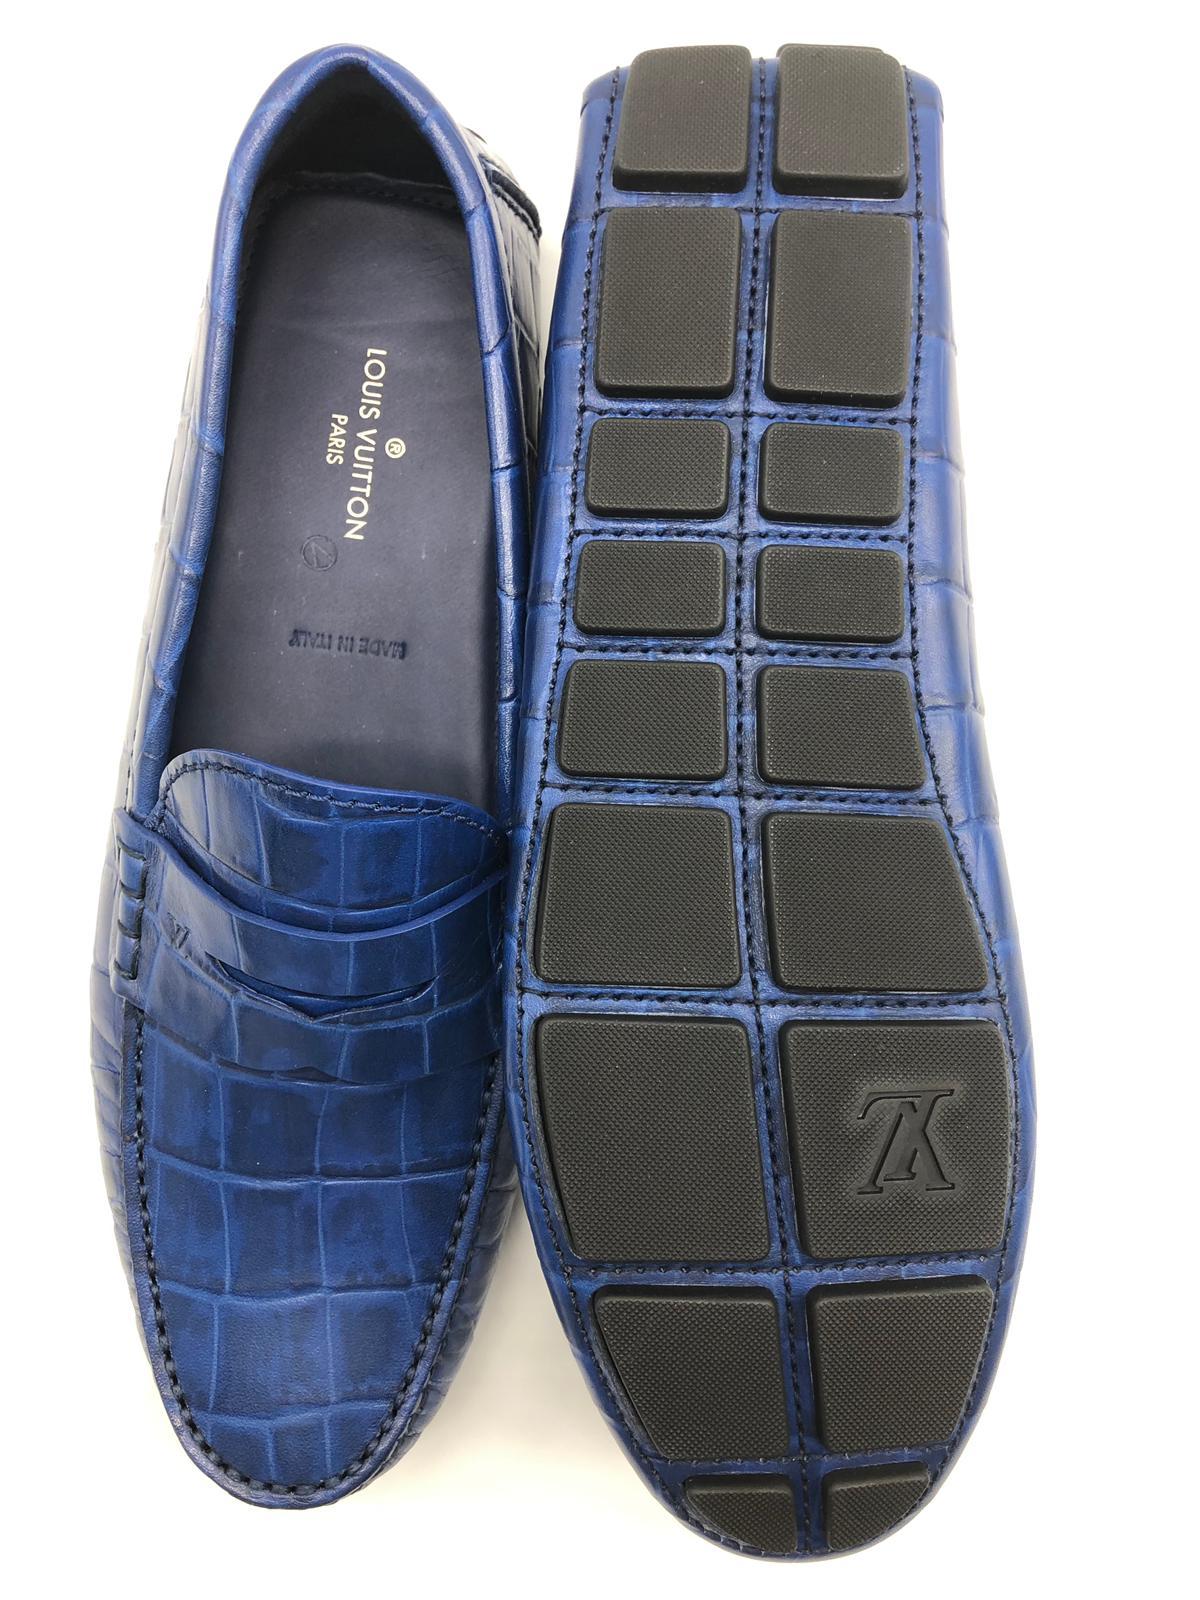 Louis Vuitton Loafers in blue leather (Crocodile style)
Model: Shade For how Crocodile blue
Size: 10 (44.5)
Brand new, sold with box